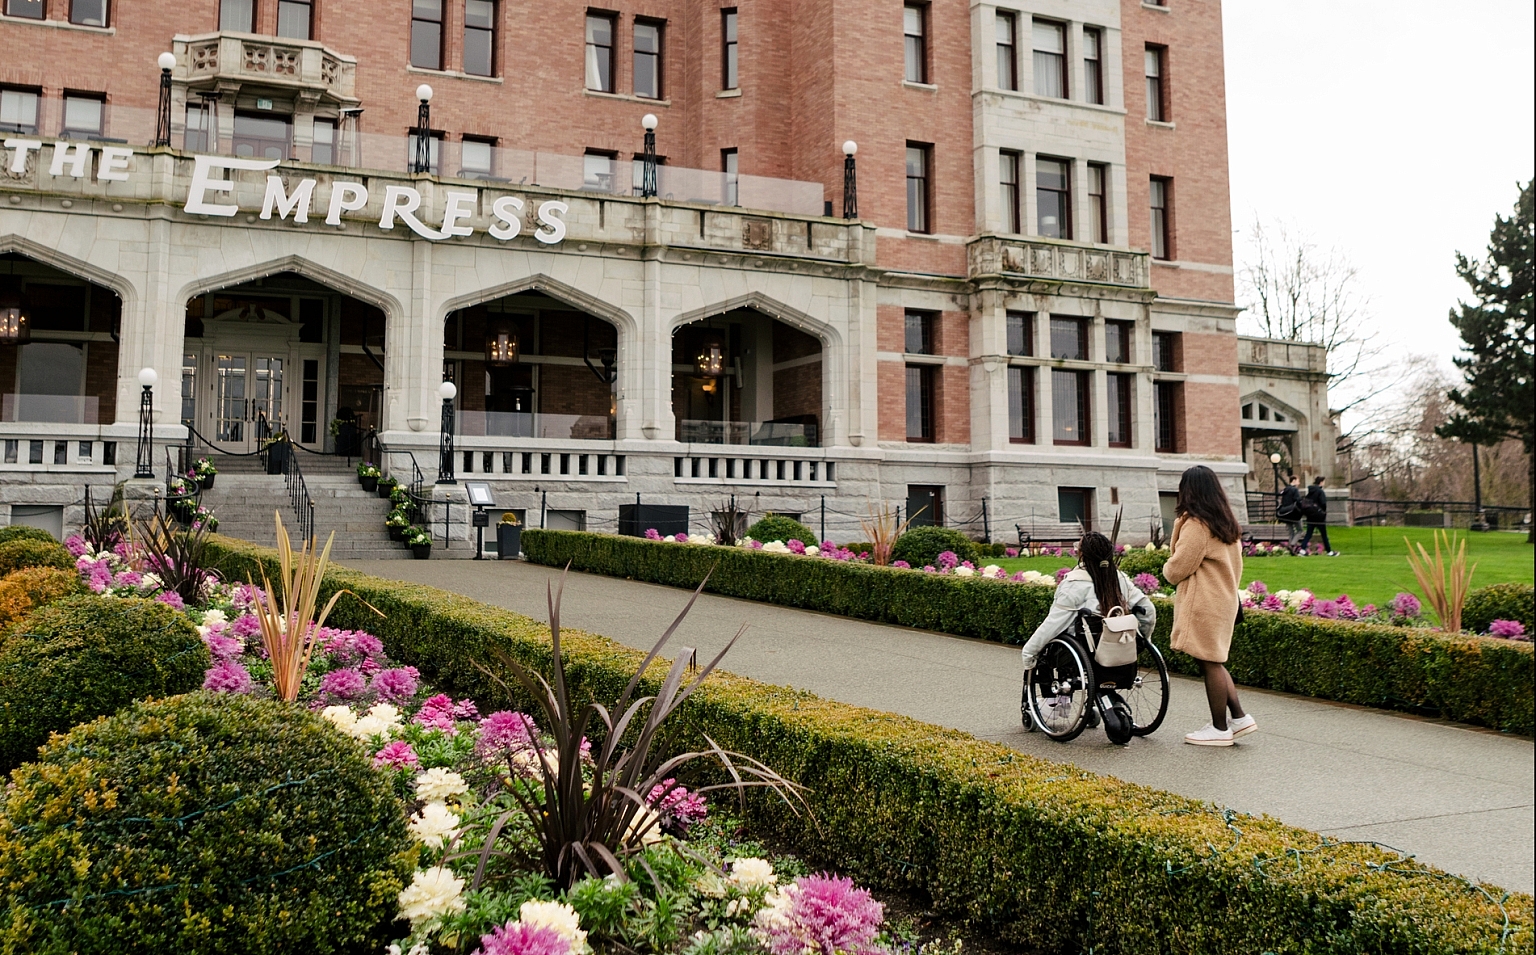 Two people approach the Fairmont Empress in Victoria. Flower gardens are seen in the foreground.